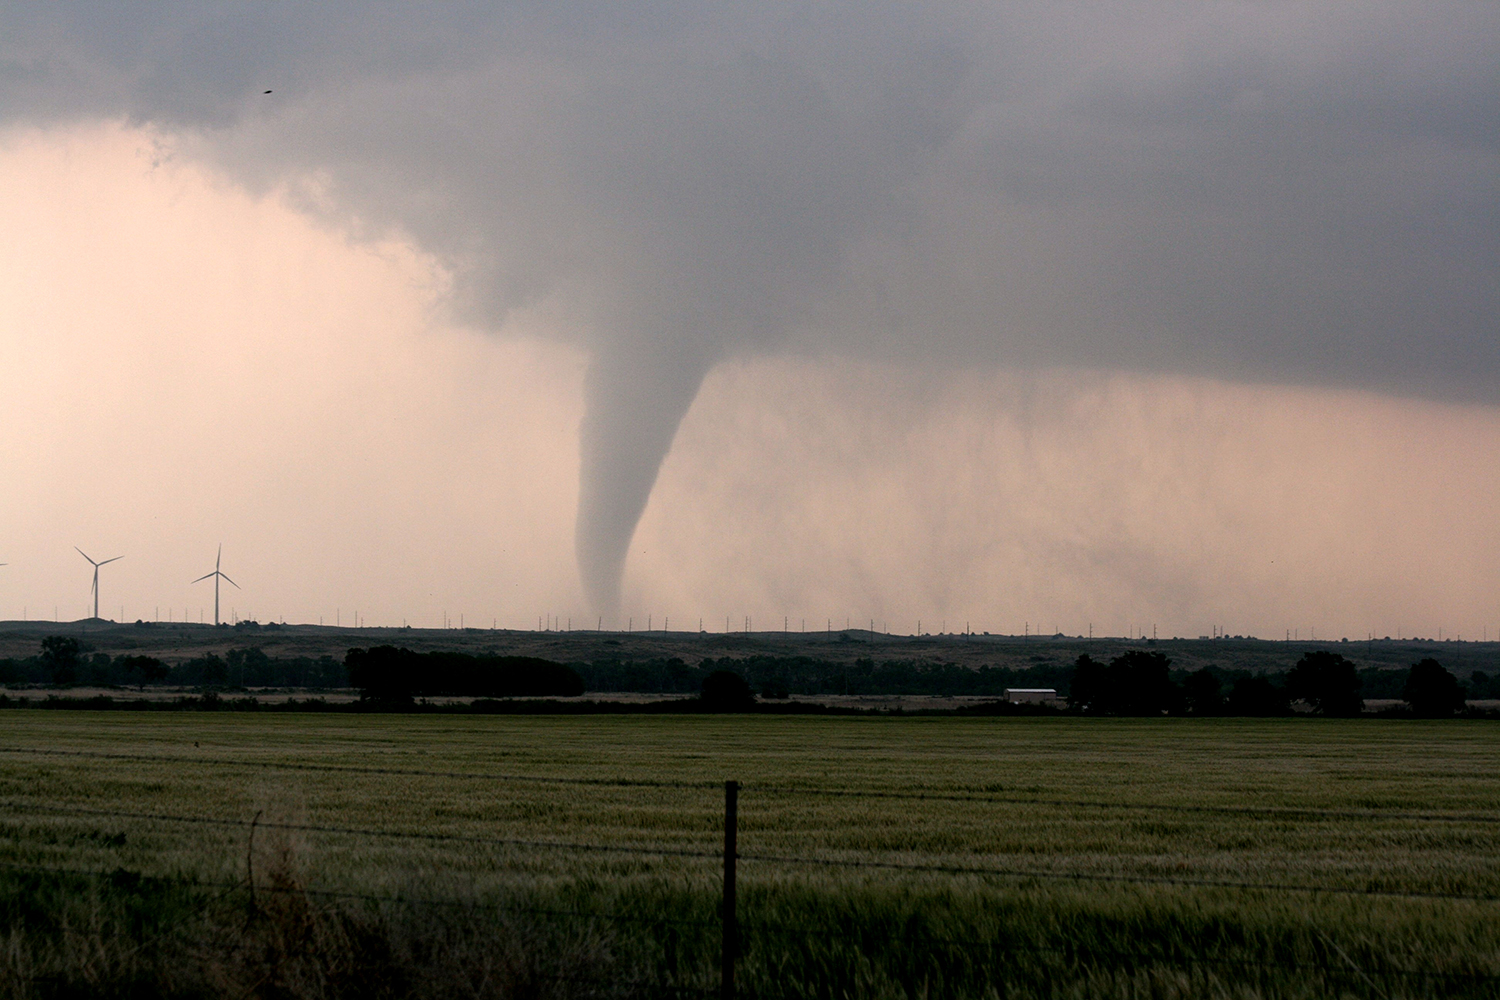 A twister touches down in Oklahoma. Social media has become pivotal in warning residents about dangerous weather. (Photo/NOAA)